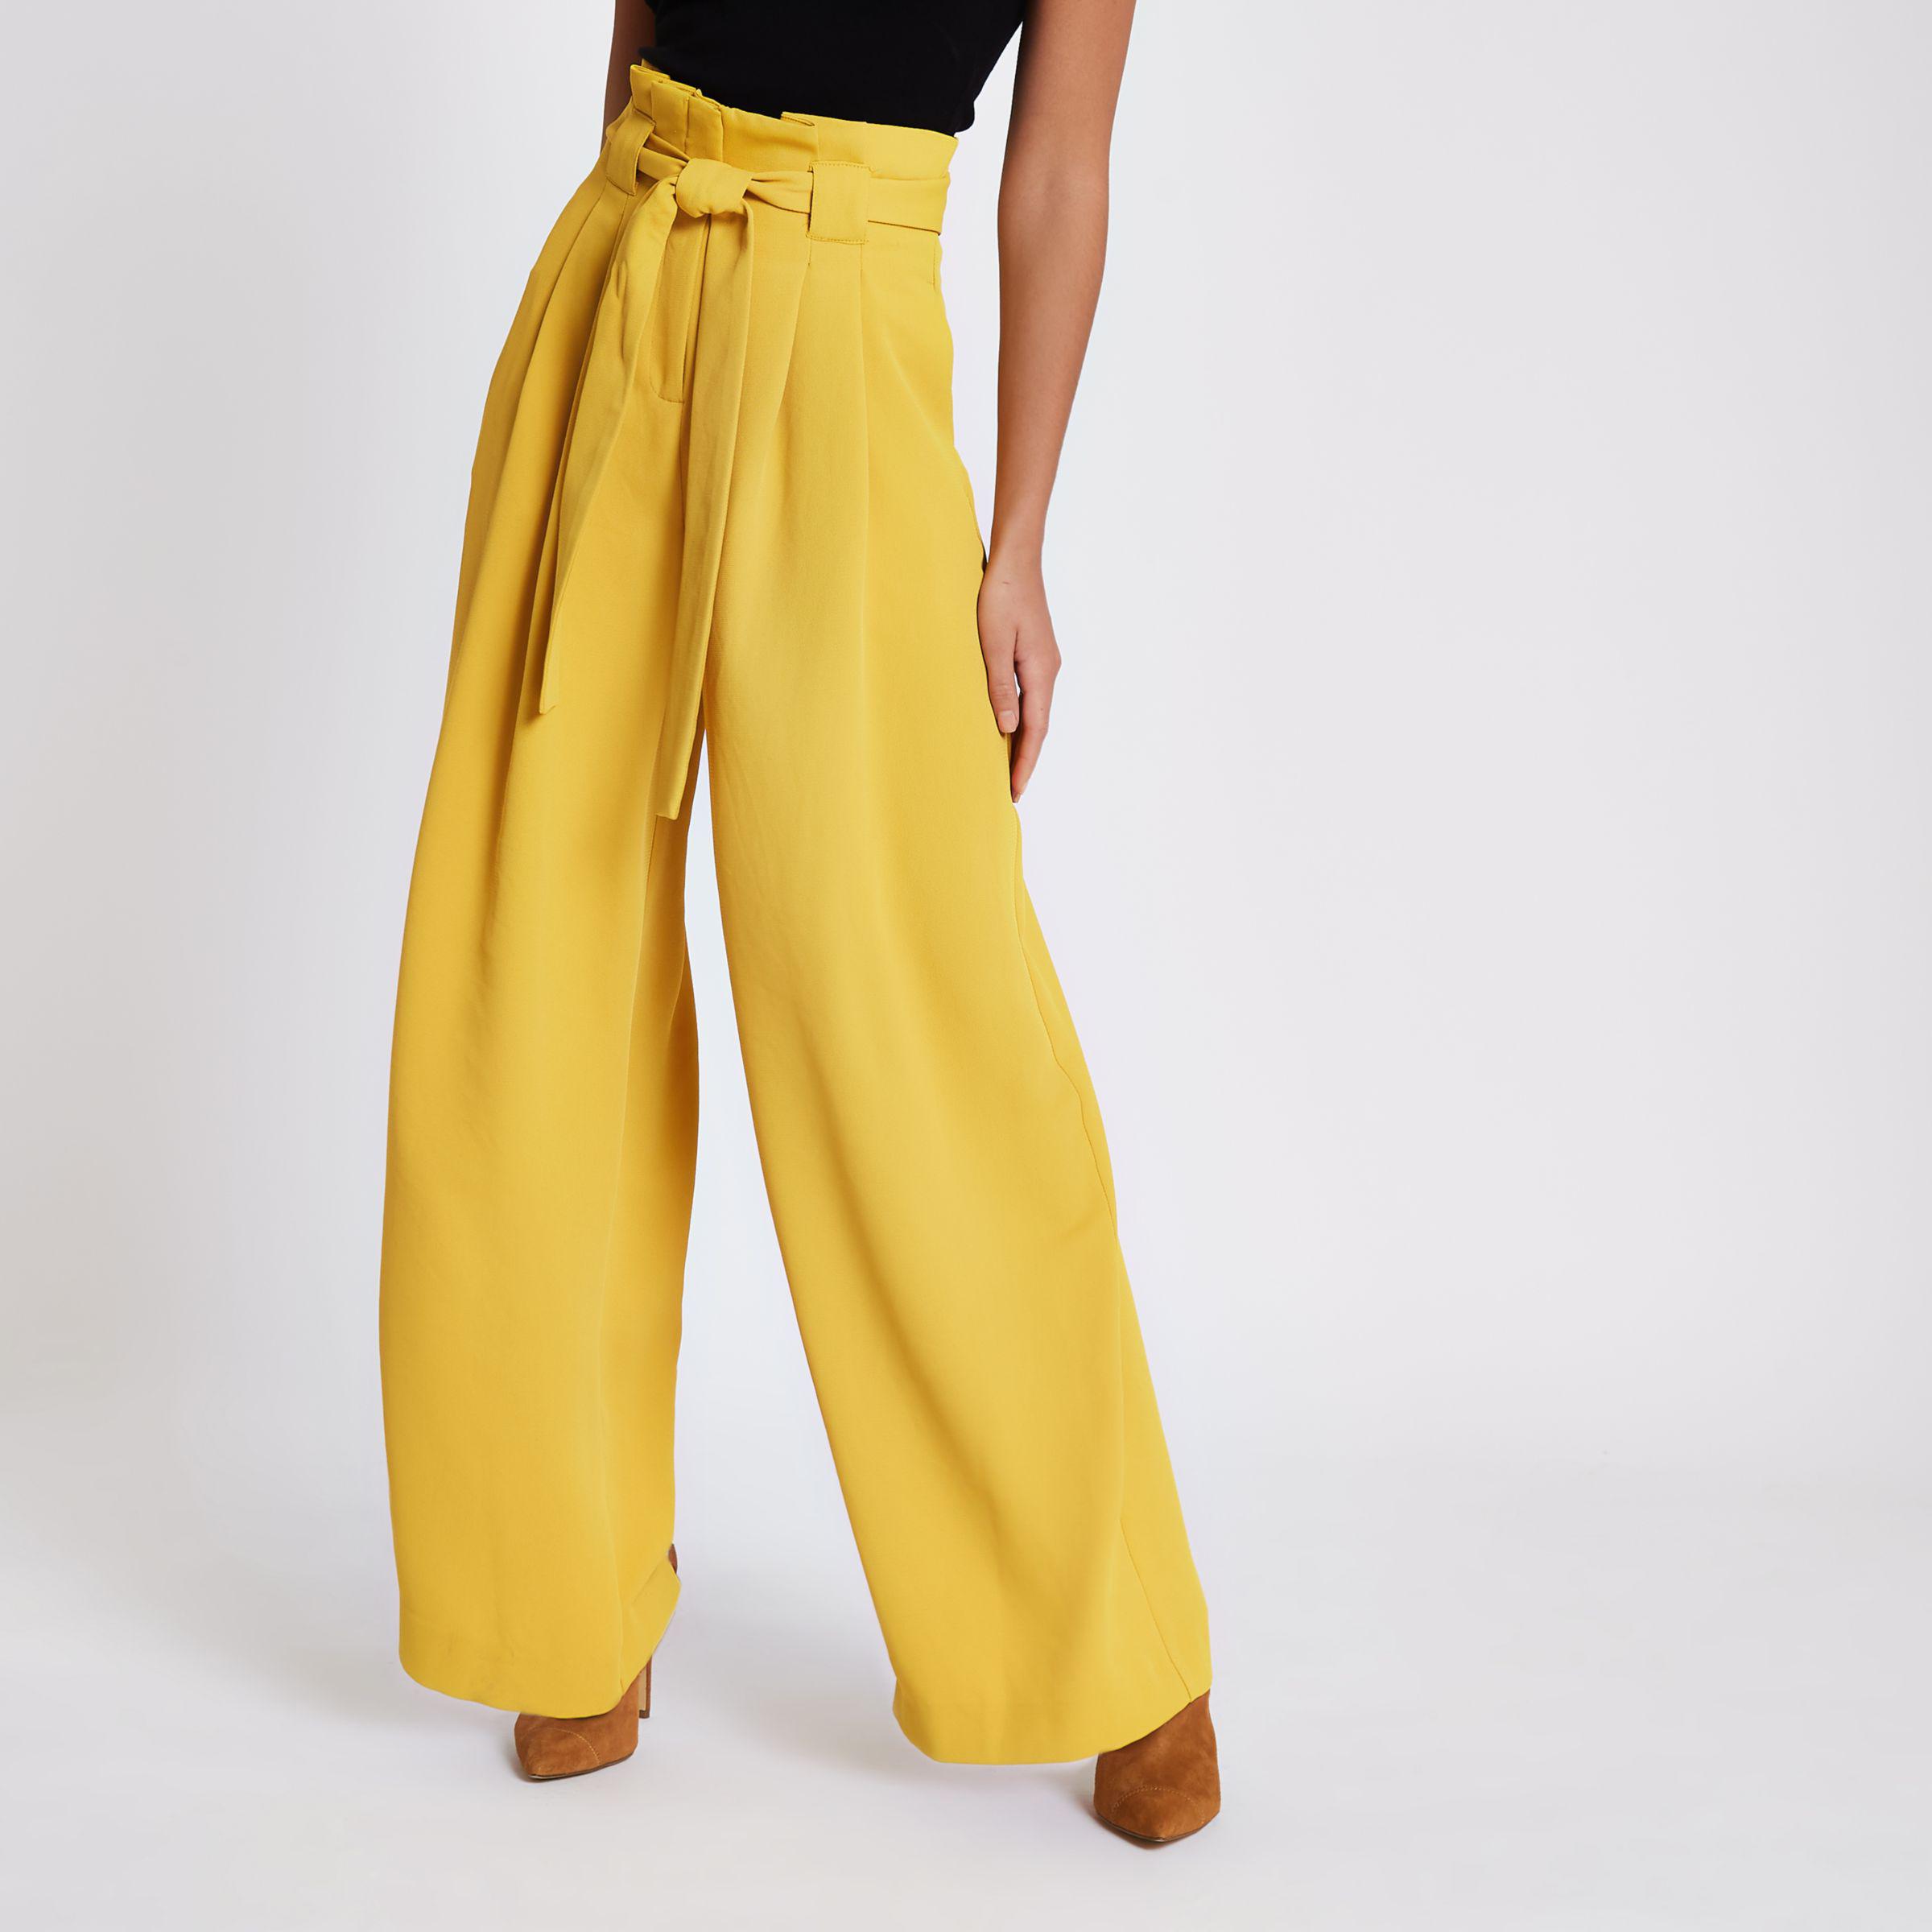 River Island Synthetic Paperbag Wide Leg Trousers in Yellow - Lyst